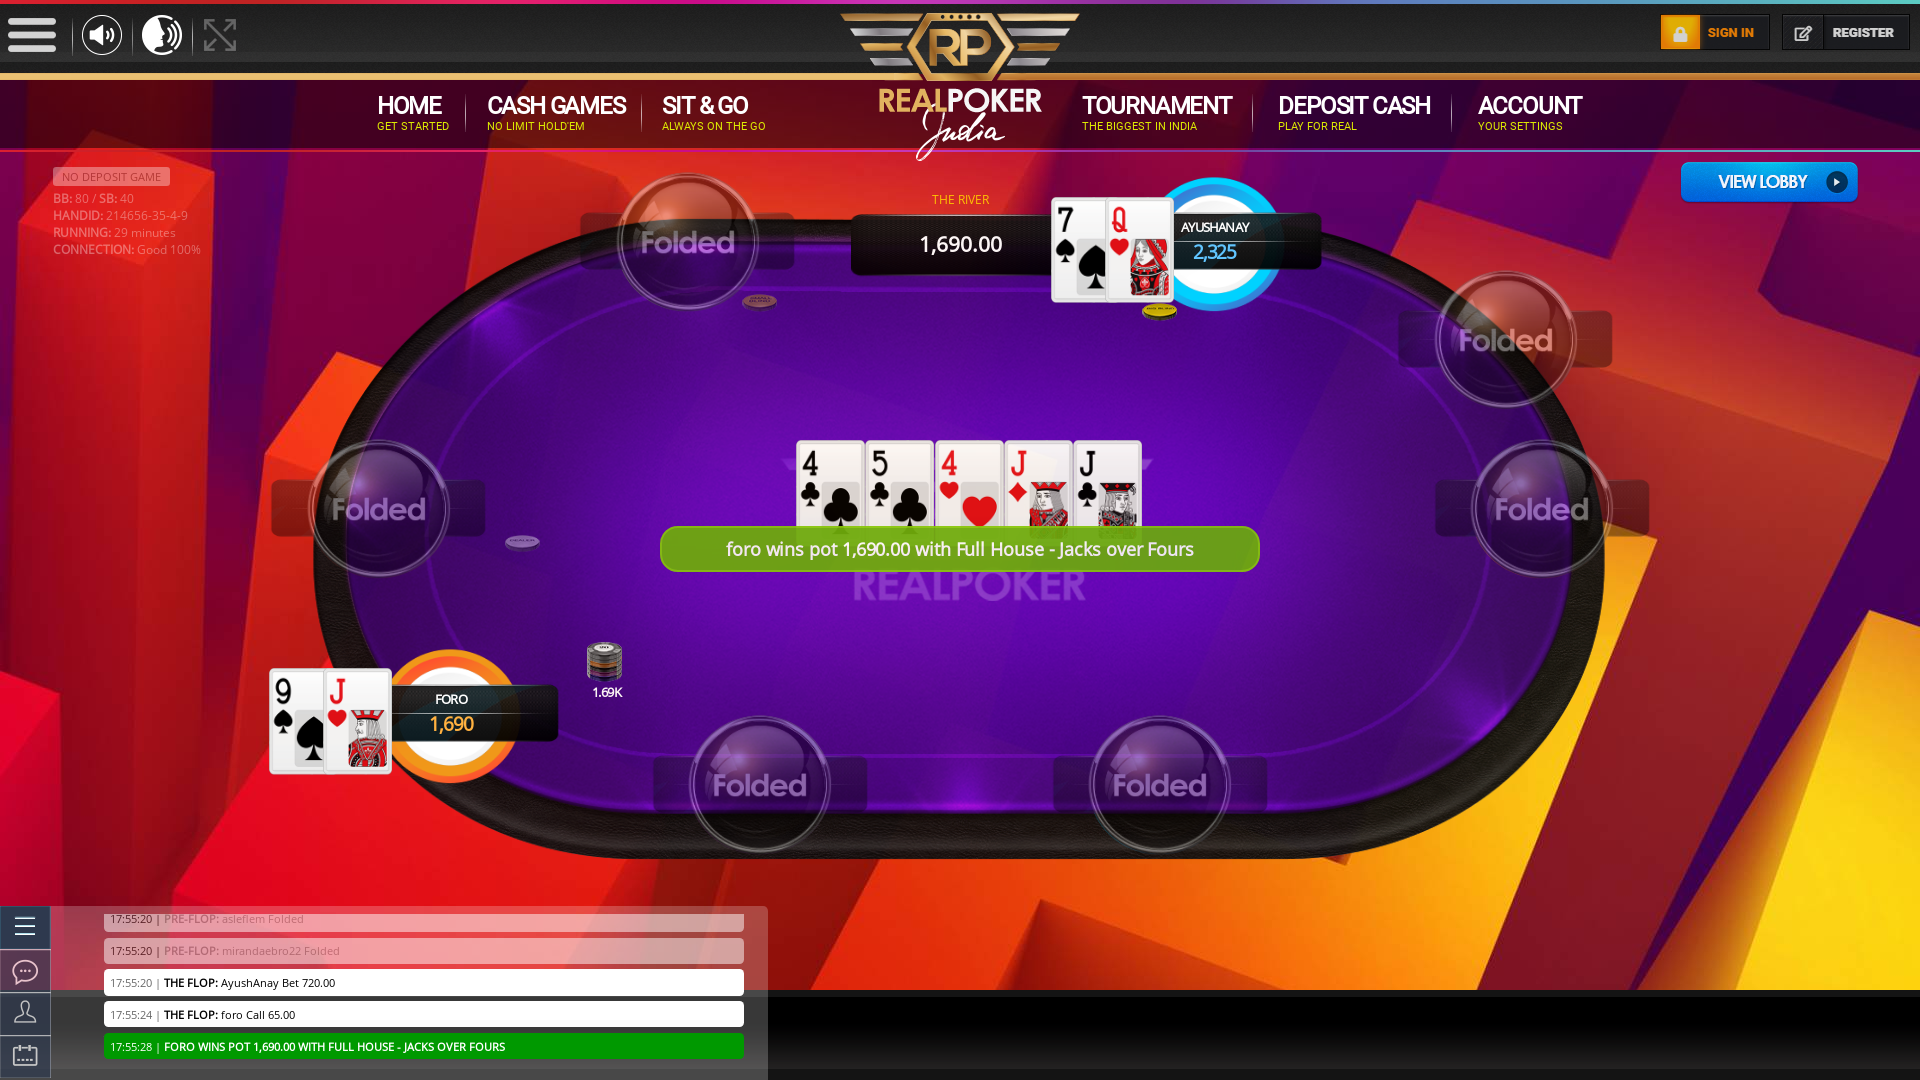 Indian poker on a 10 player table in the 29th minute